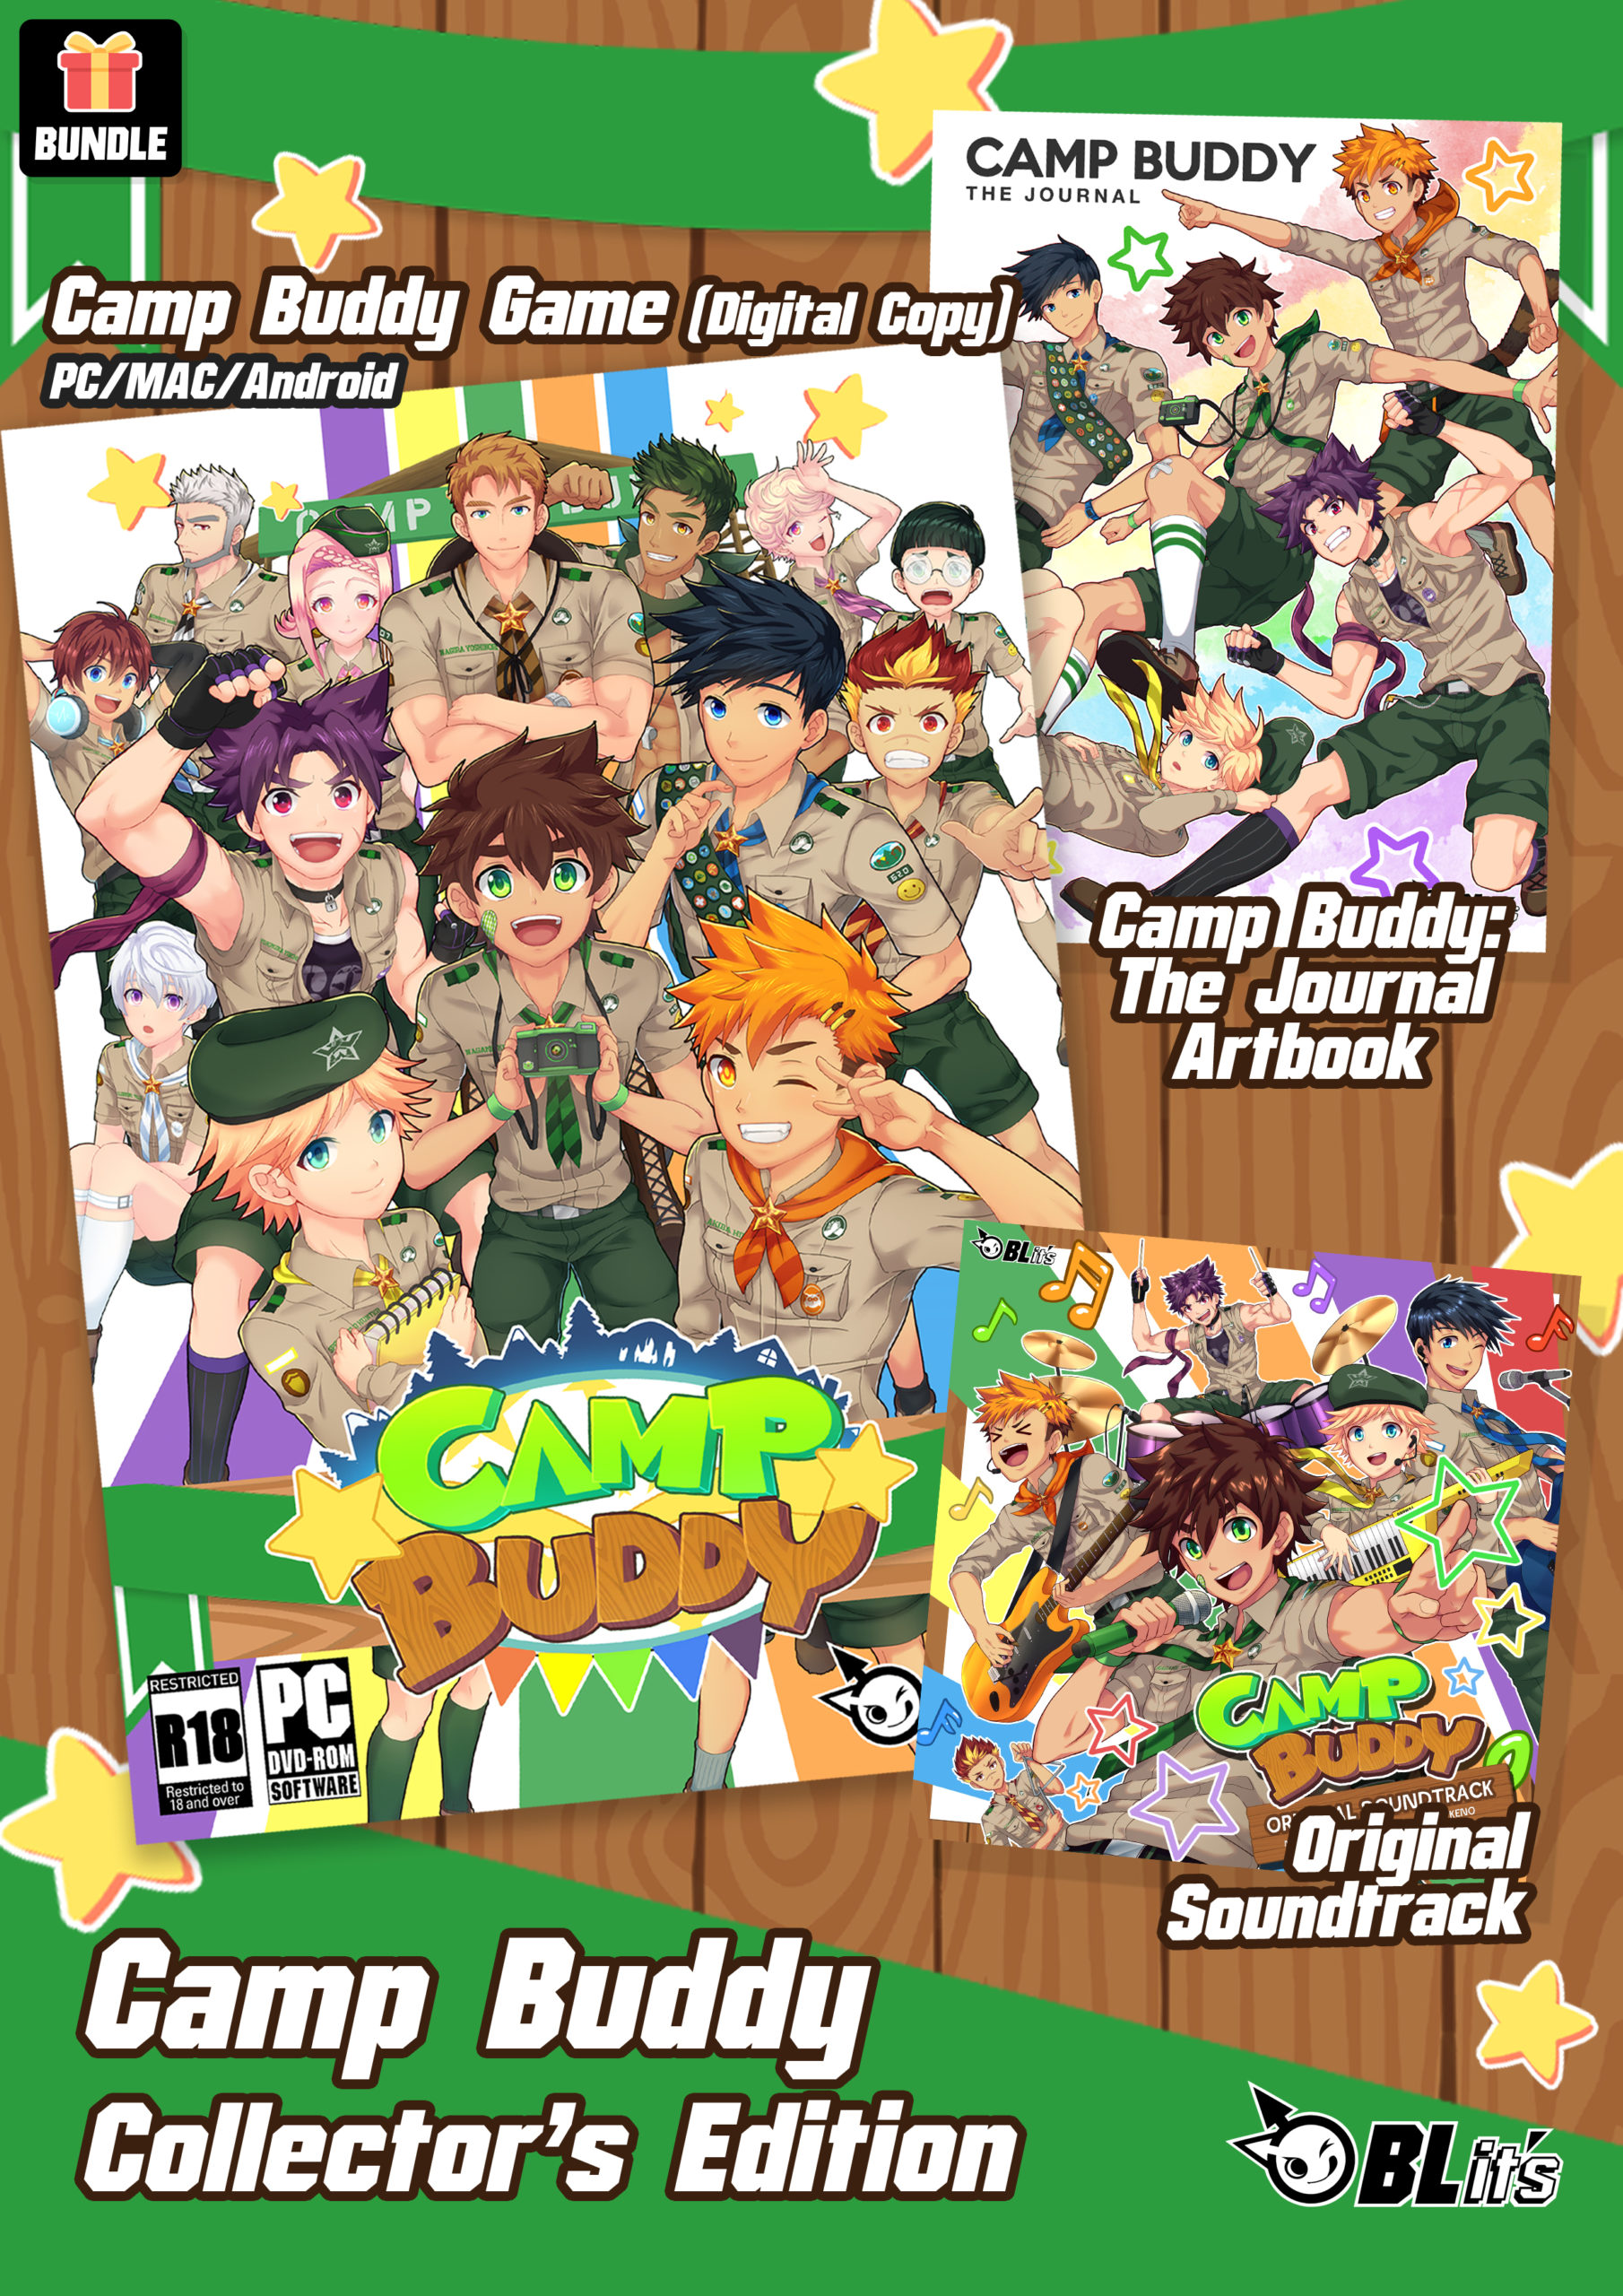 Camp Buddy Collector's Edition | BLits Games